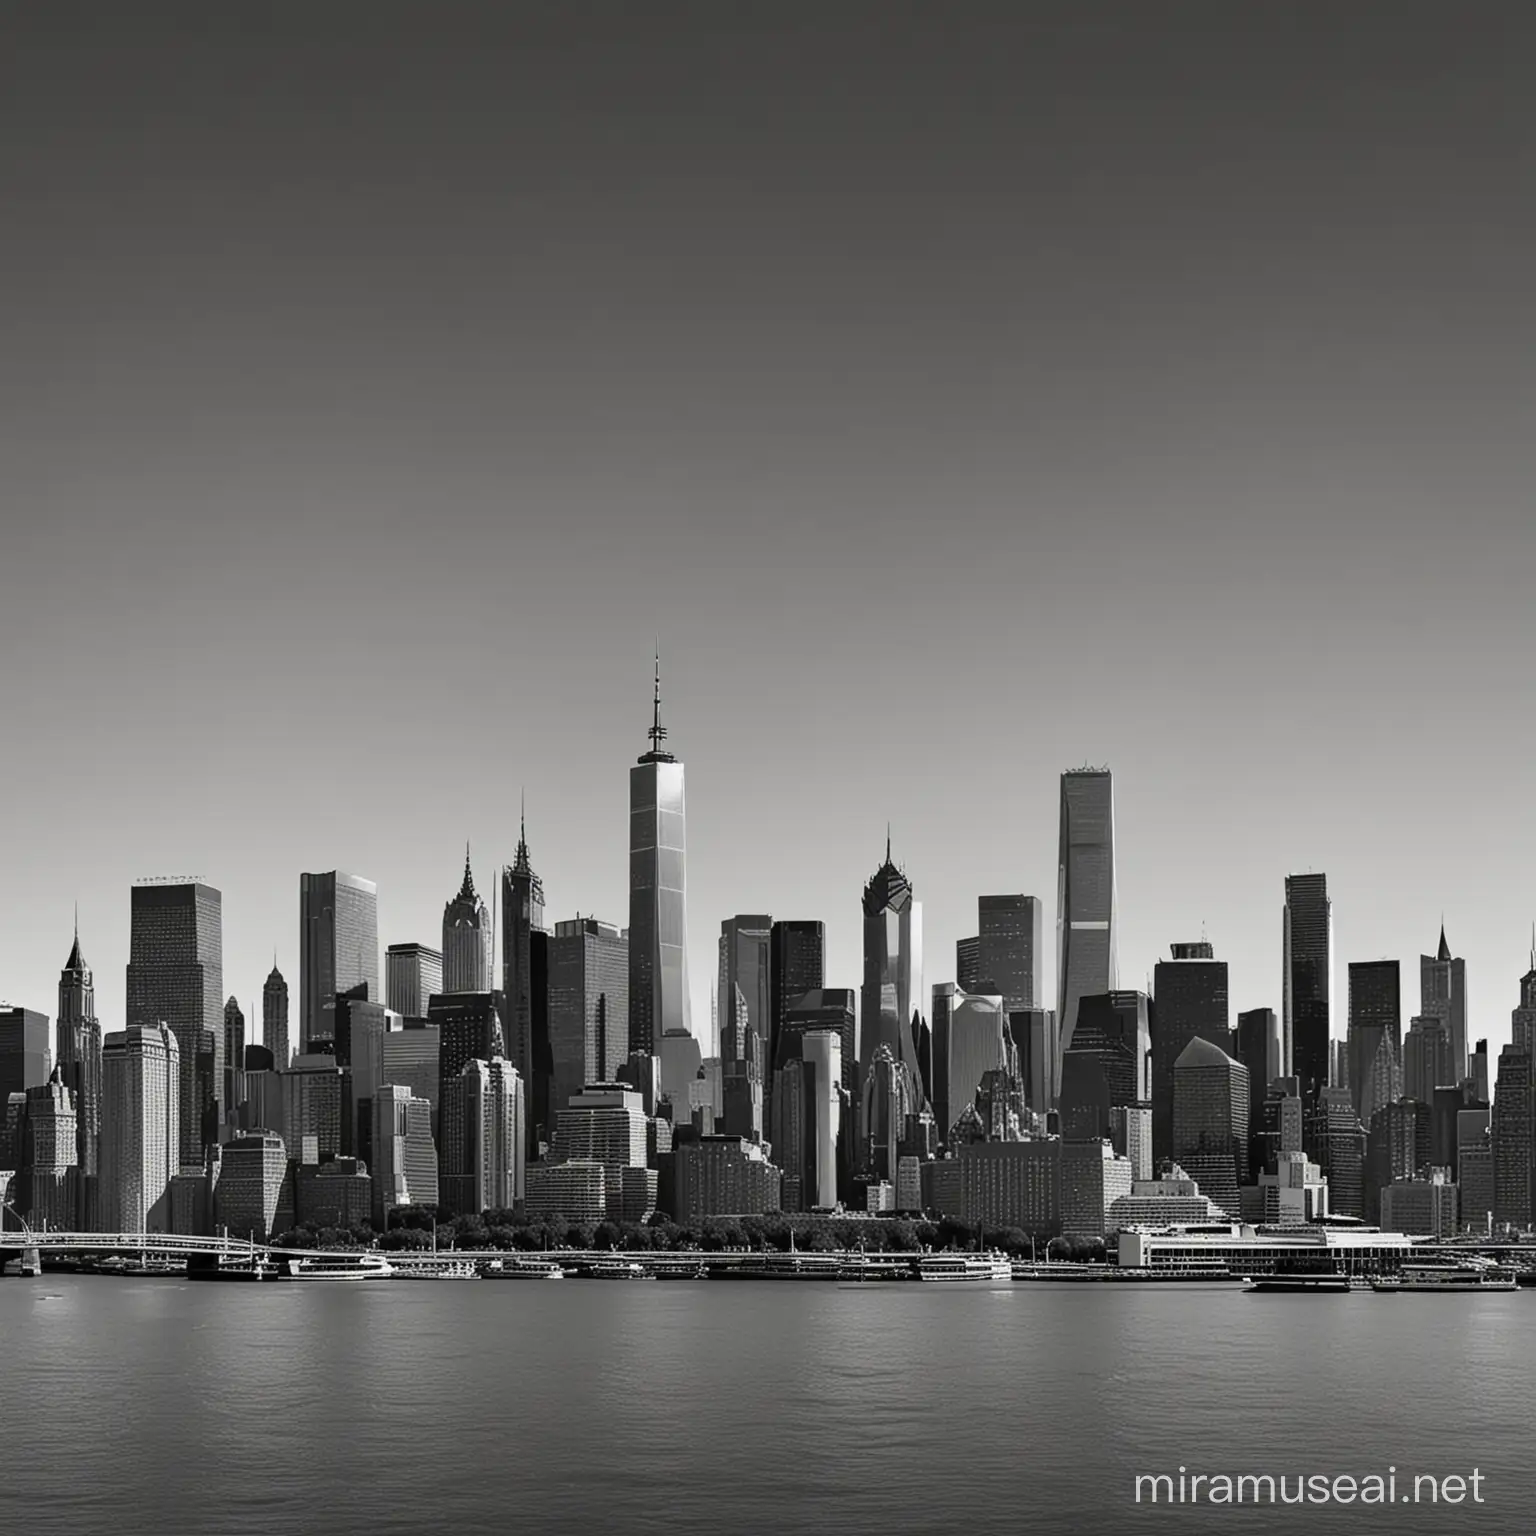 generate a skyline of an iconic city